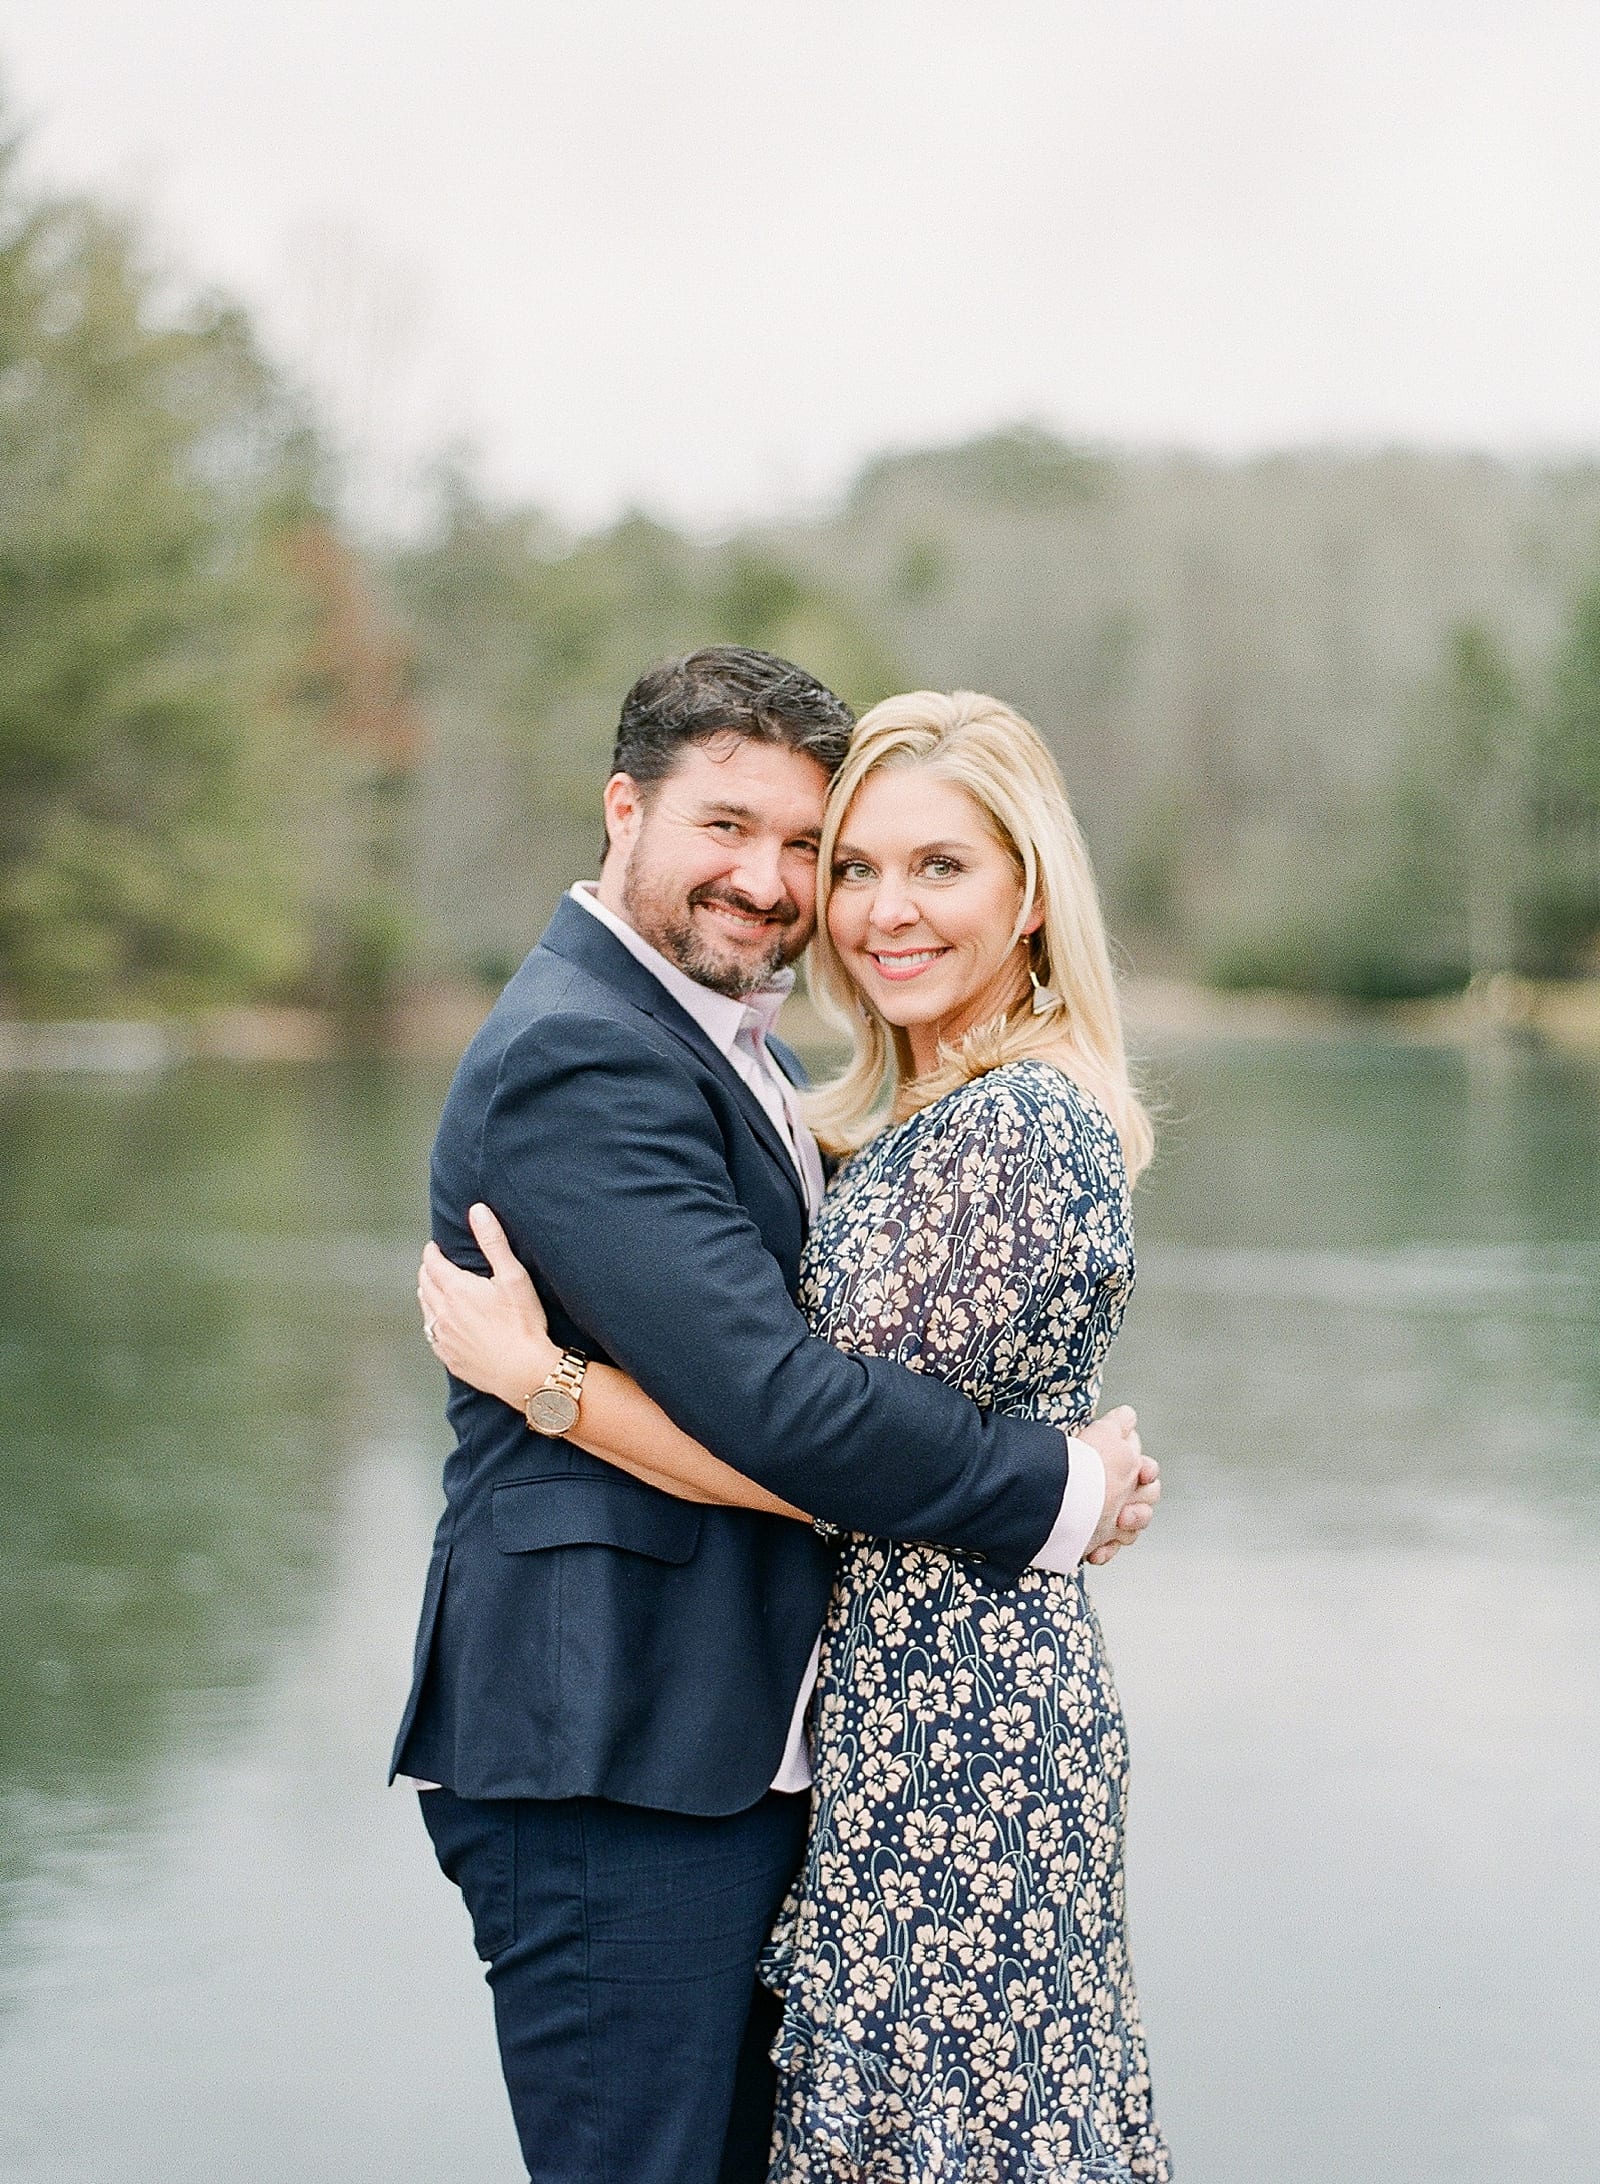 Couple Hugging Smiling at Camera on a Dock Photo